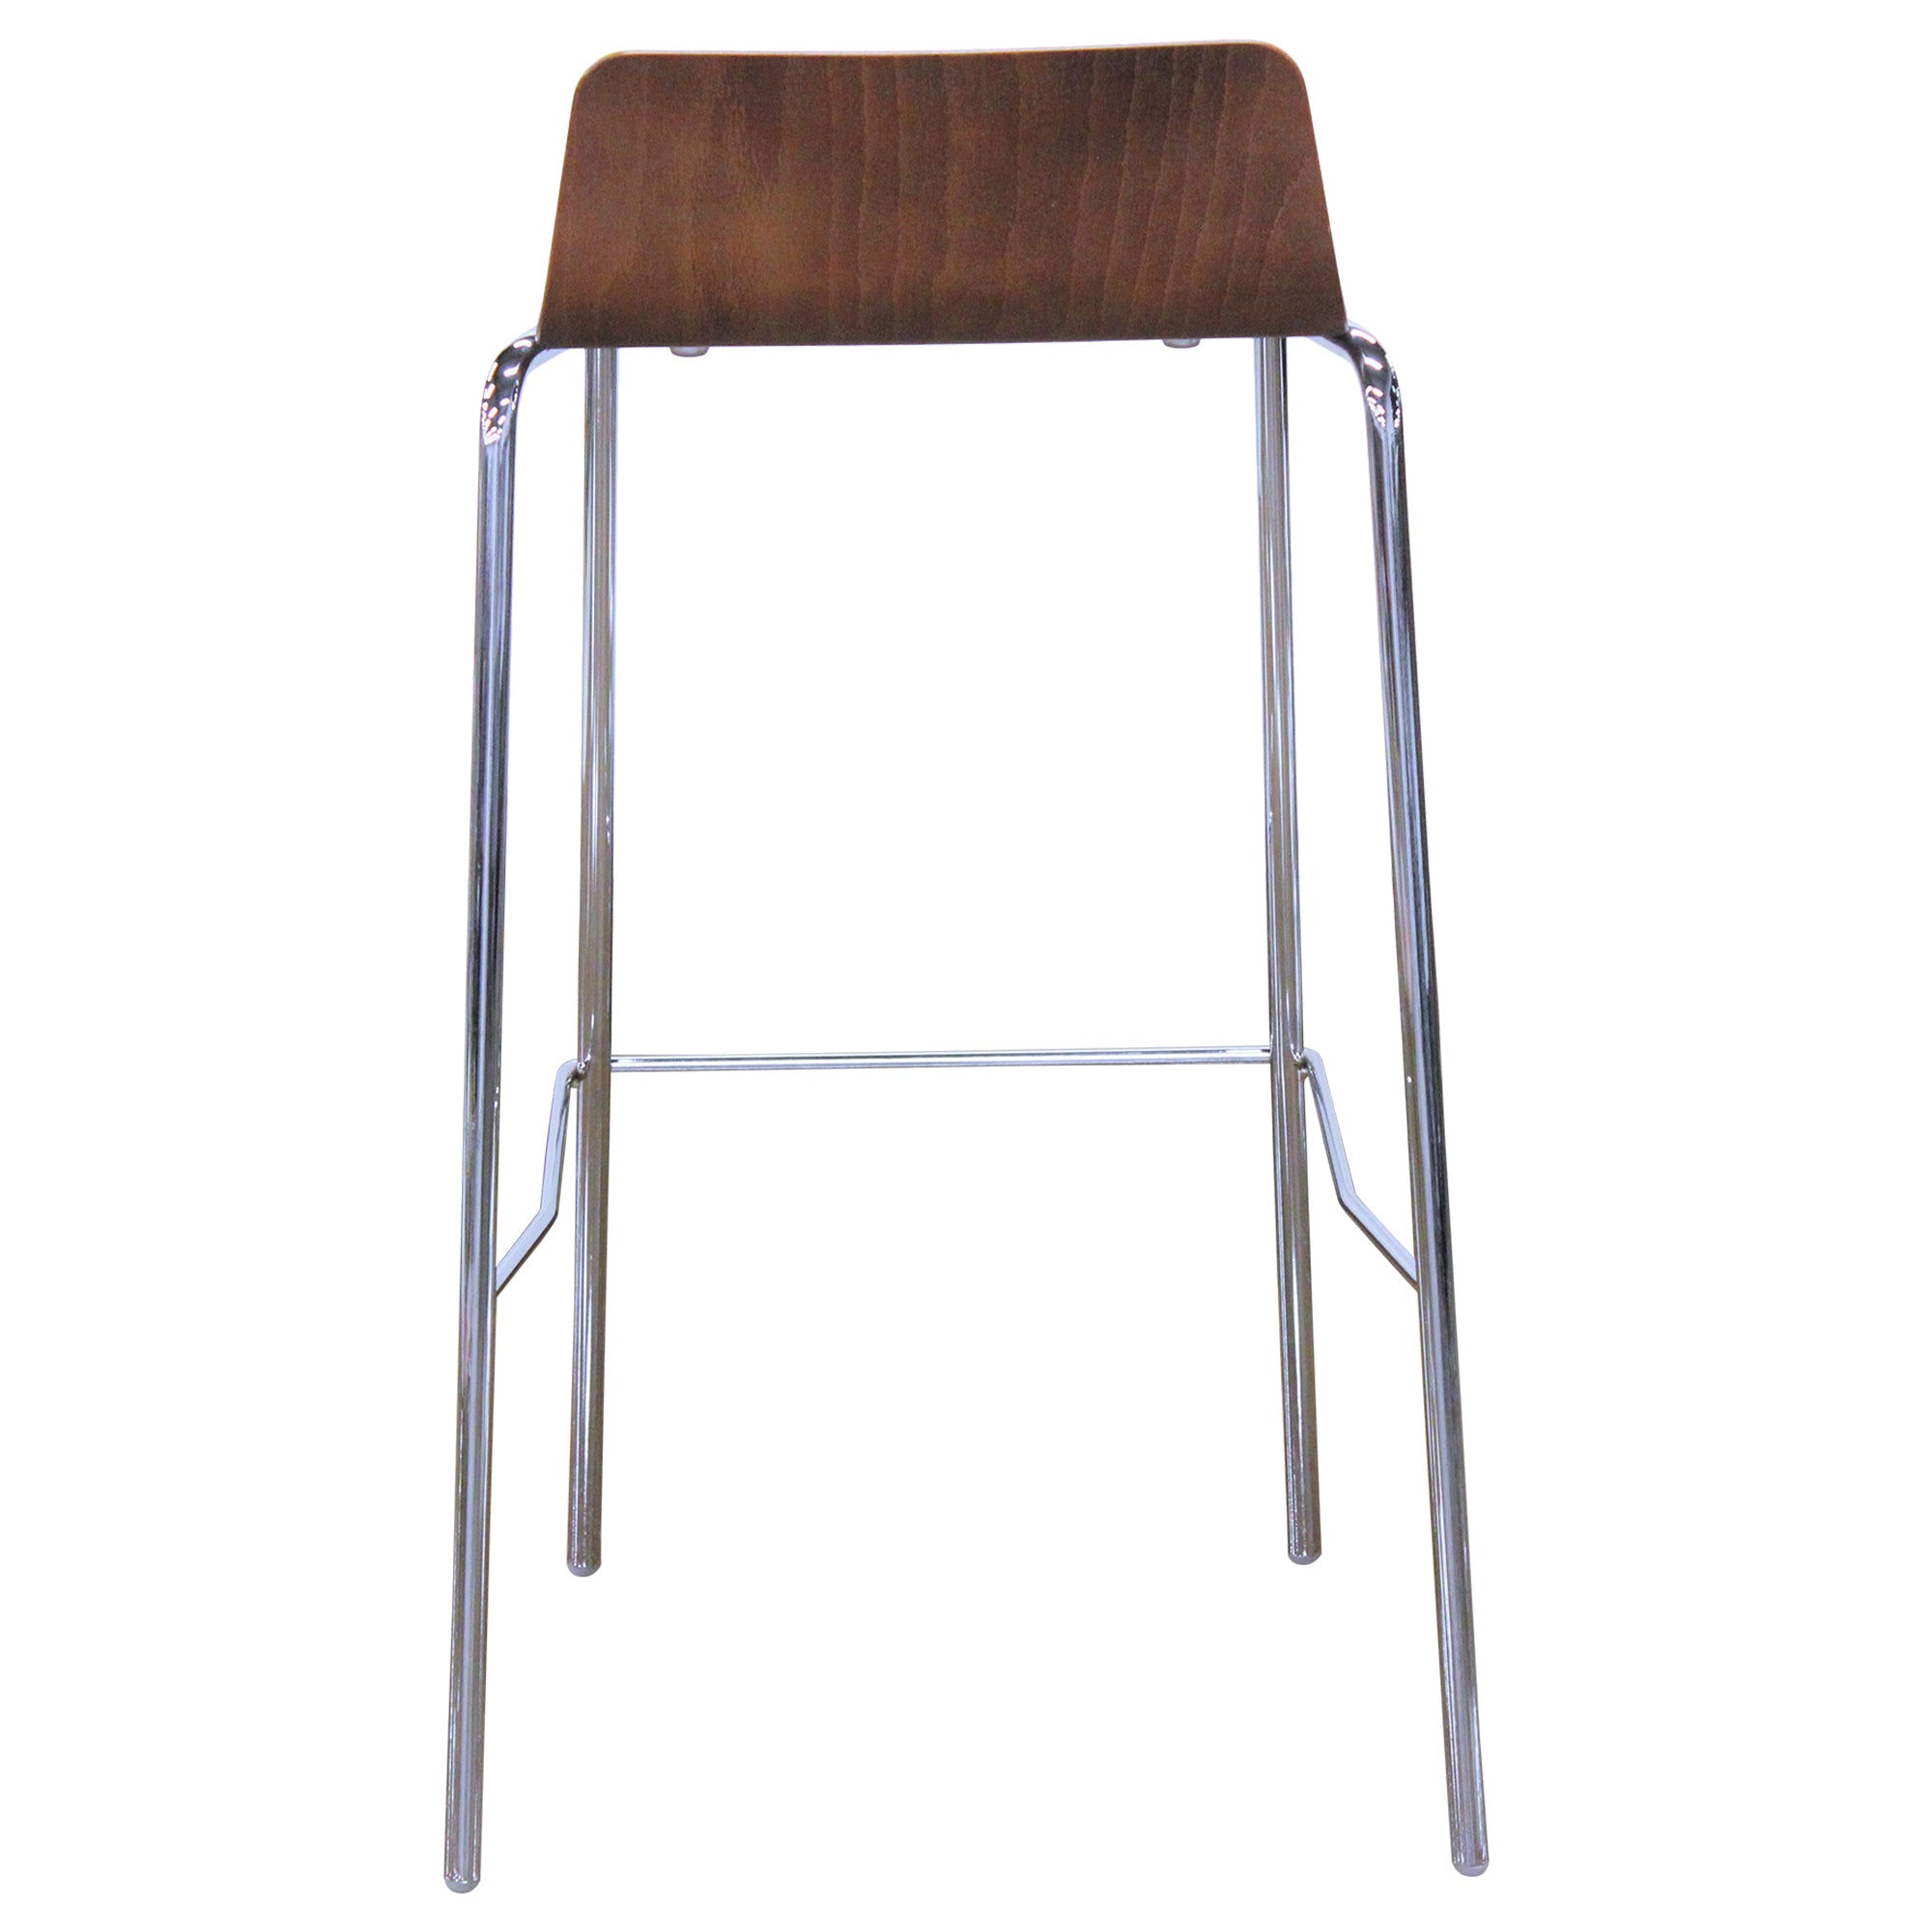 Allermuir Bar Height Stool, Brown - Preowned